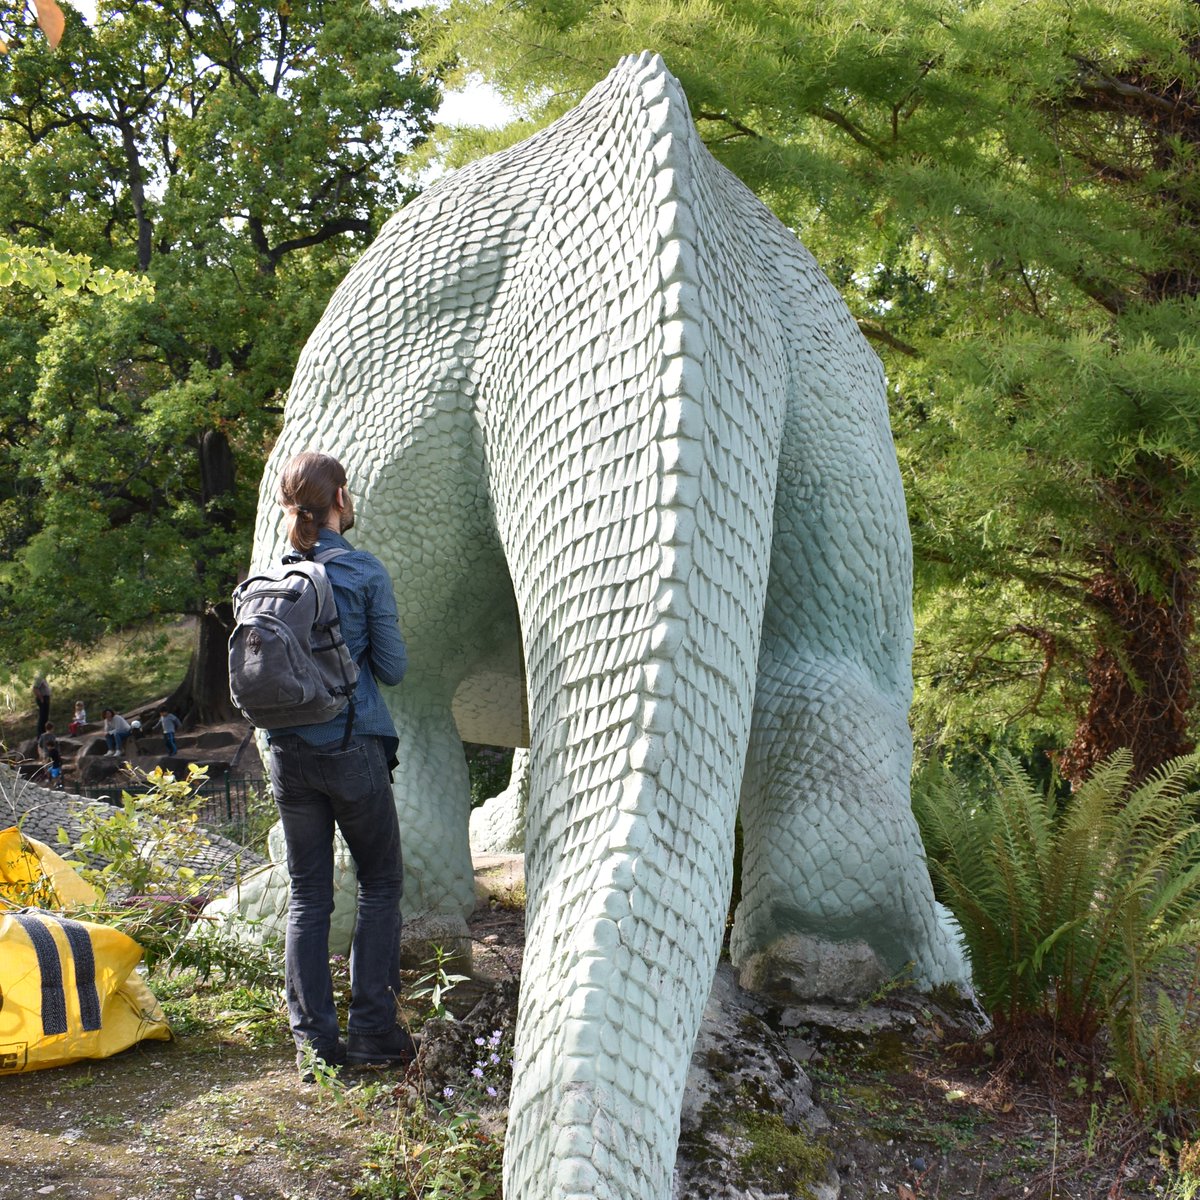 The $million question about the evening is the seating plan. The Iguanodon mould was big... but that _that_ big. It would have been about 30 ft long, maybe 10-ish ft high. (I'm standing next to the Iguandon sculptures in the image below - I'm 5' 10".)